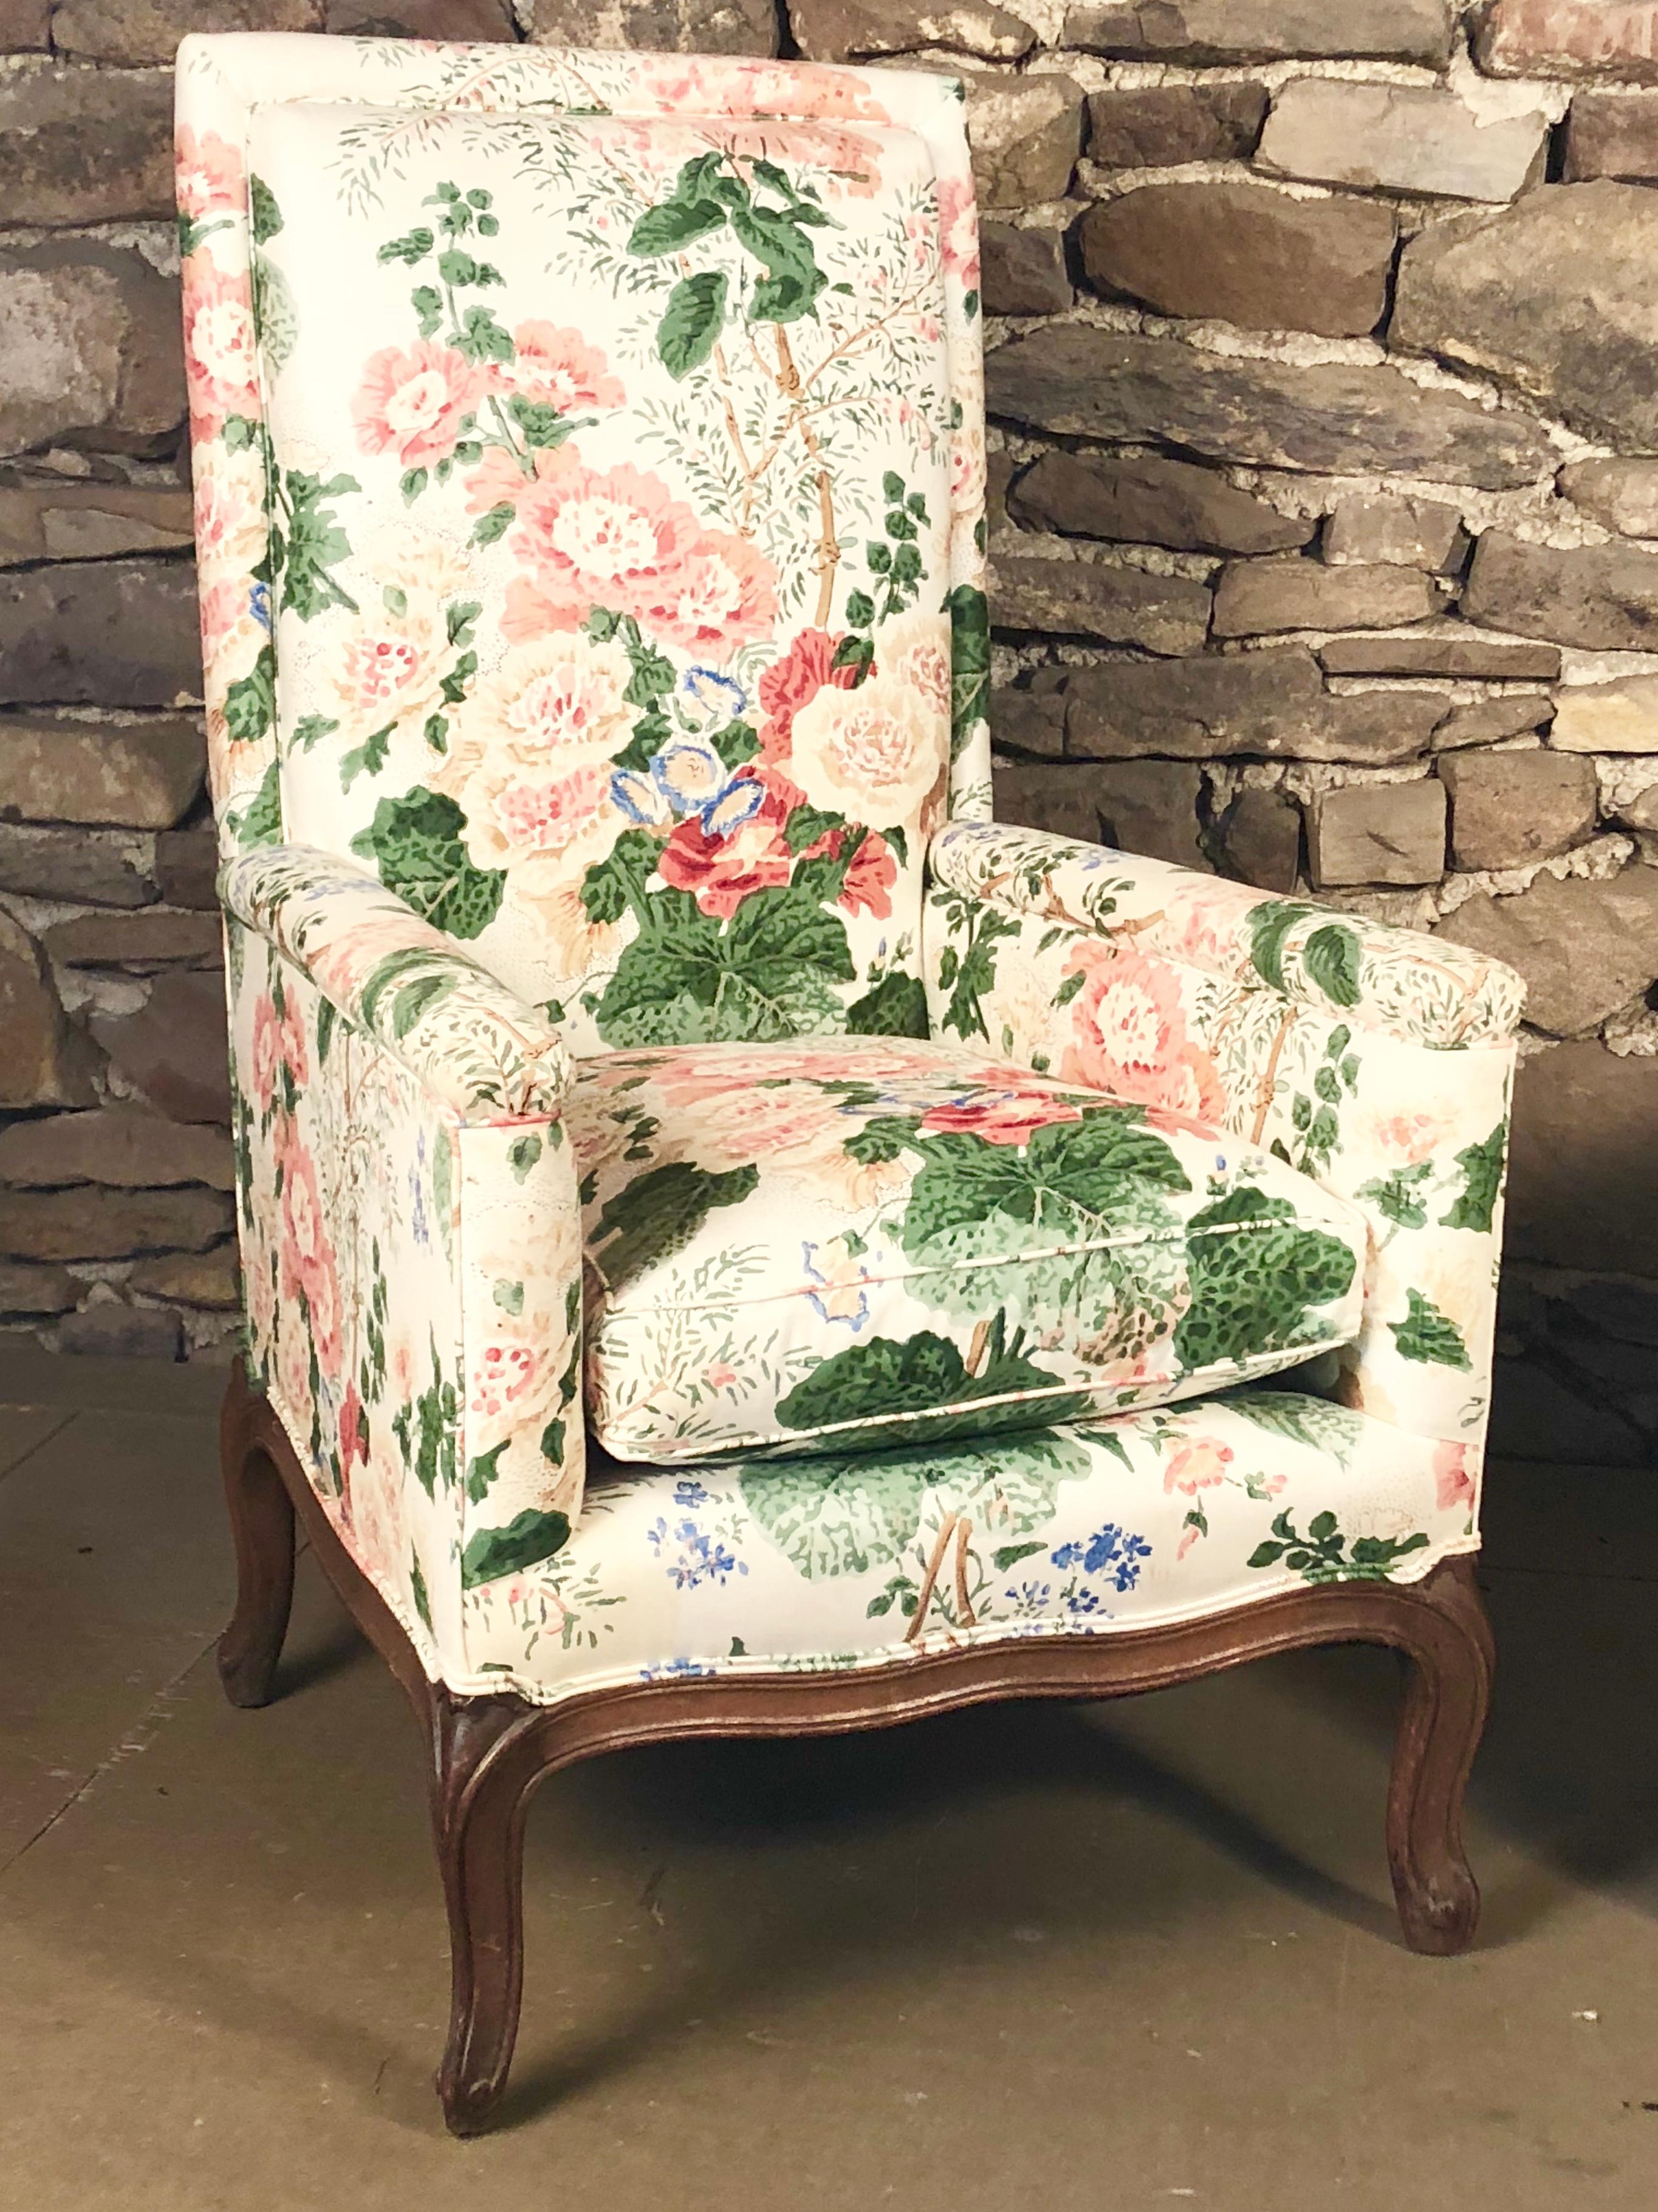 A pair of French Louis XV upholstered armchairs with high backs and loose cushion seat, the cherrywood frame exposed at the base with cabriole legs and a scalloped apron, circa 1790.